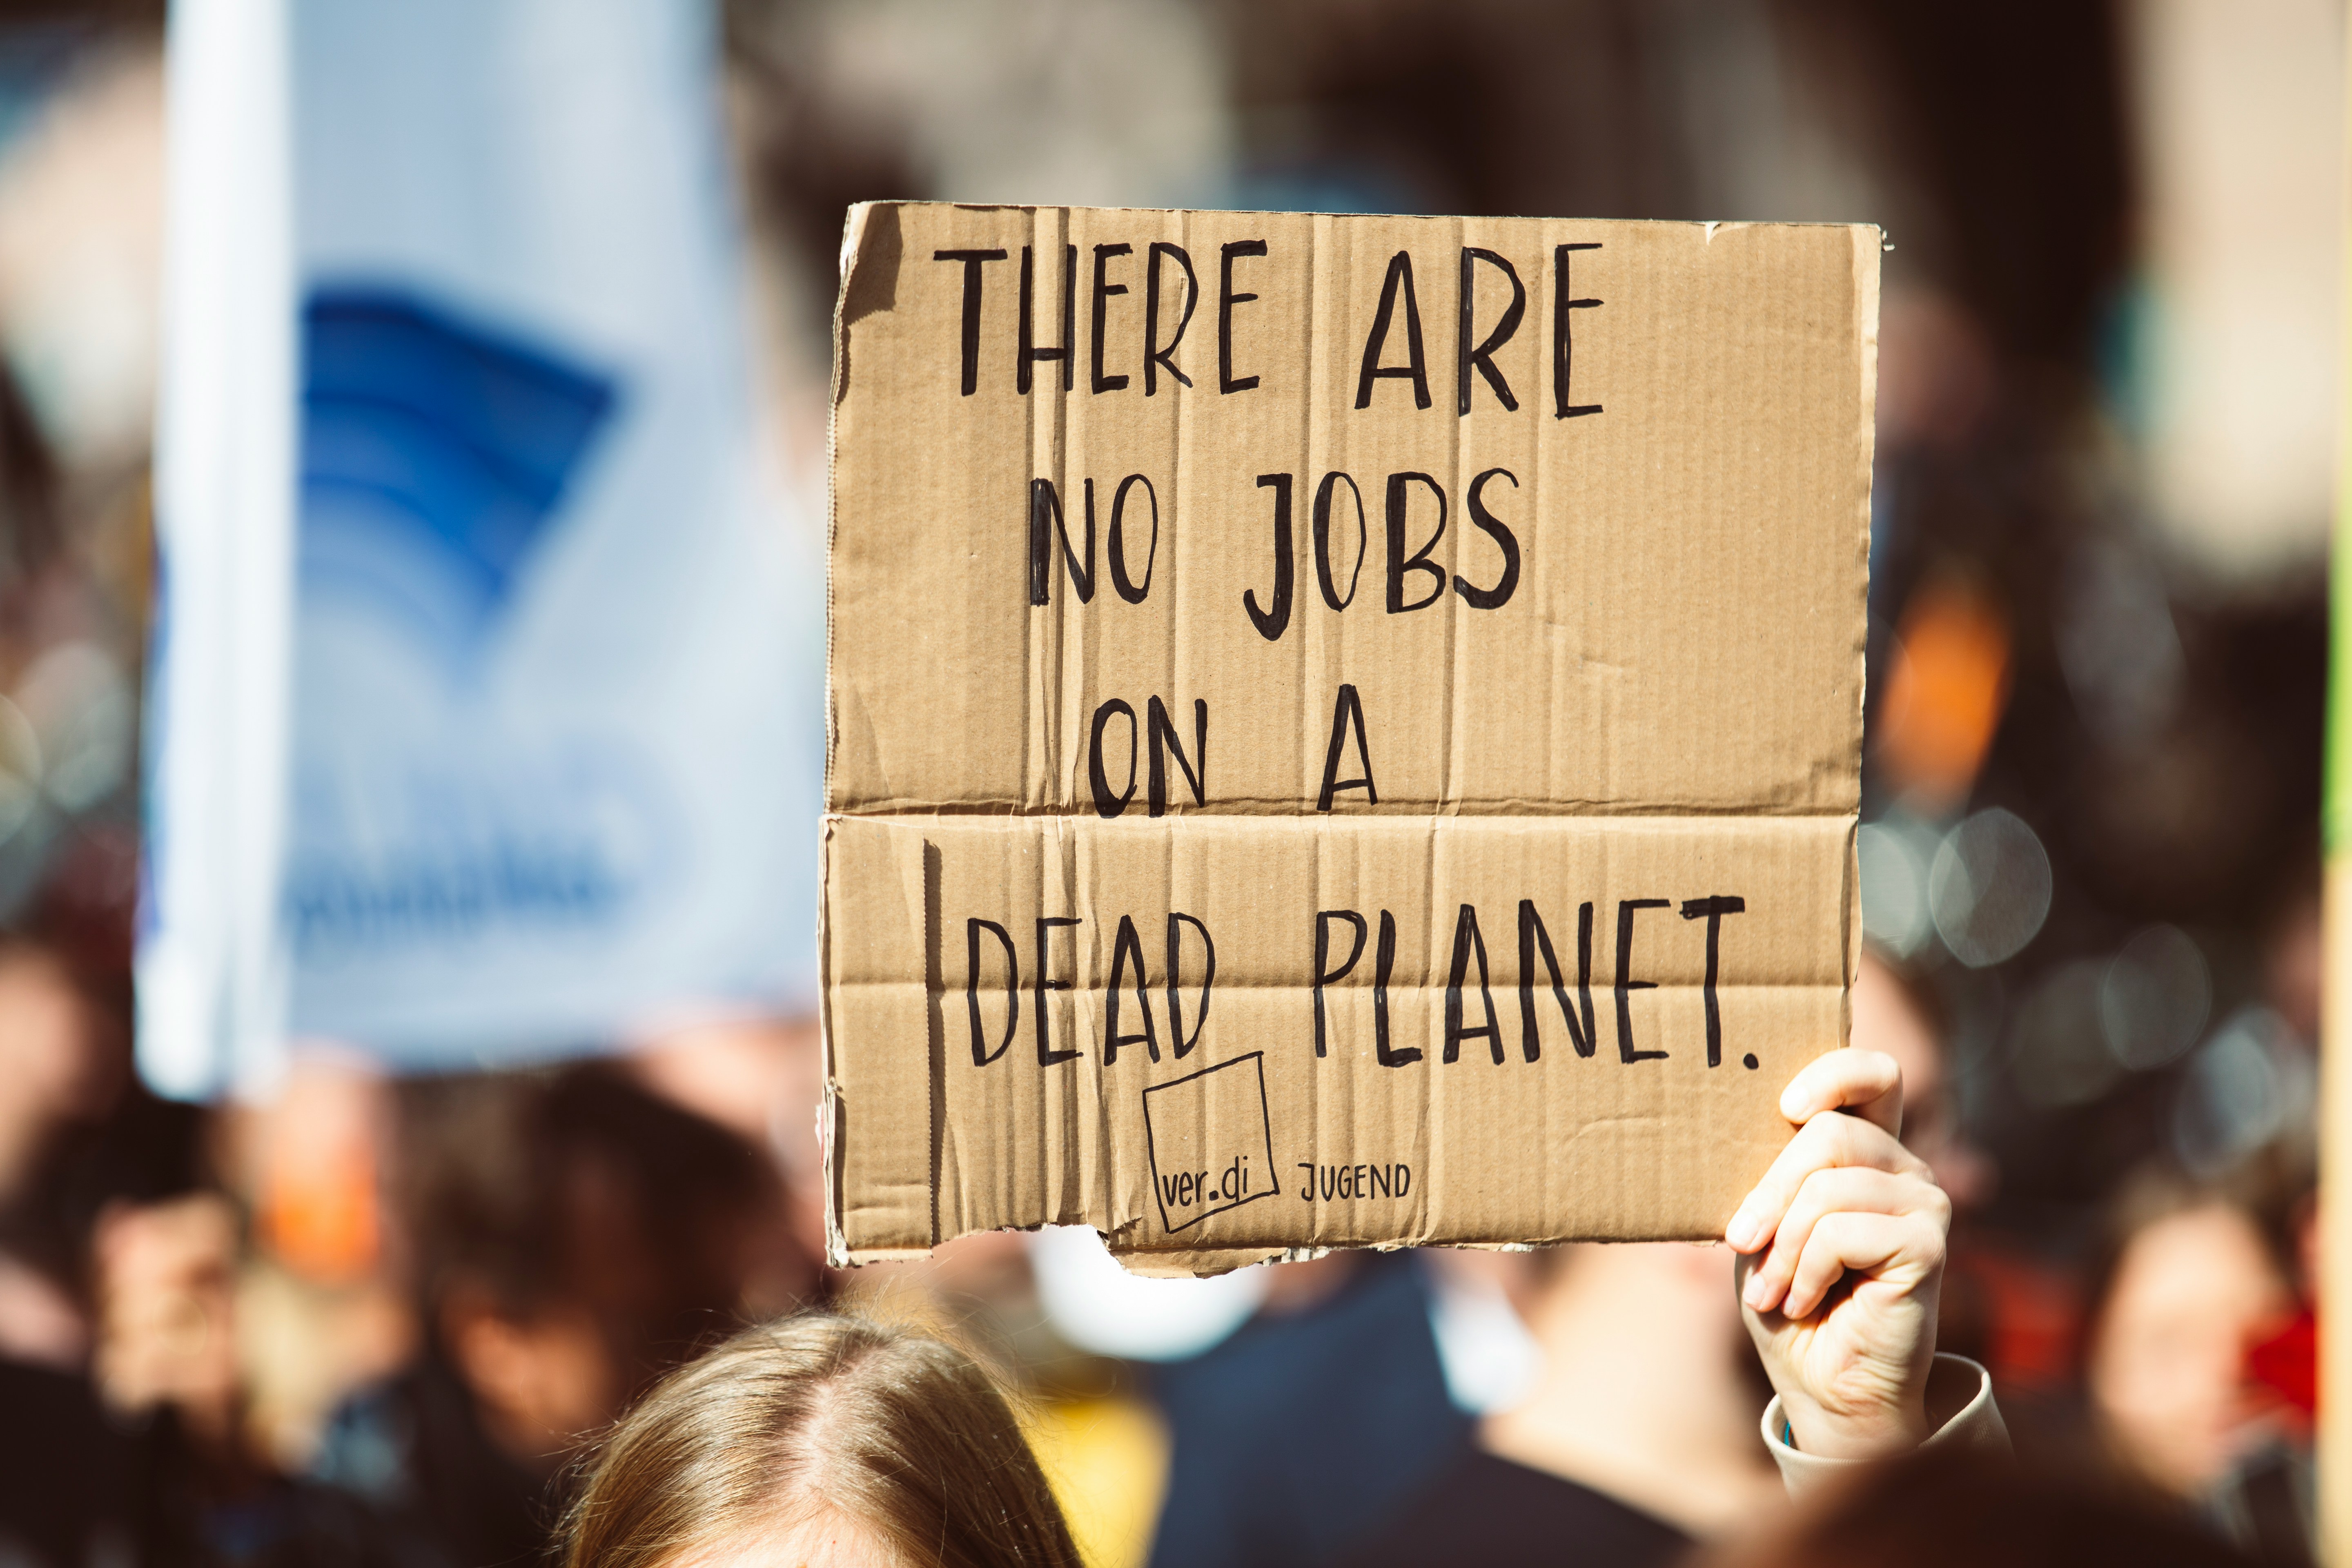 A cardboard sign held up at a protest read 'There are no jobs on a dead planet'